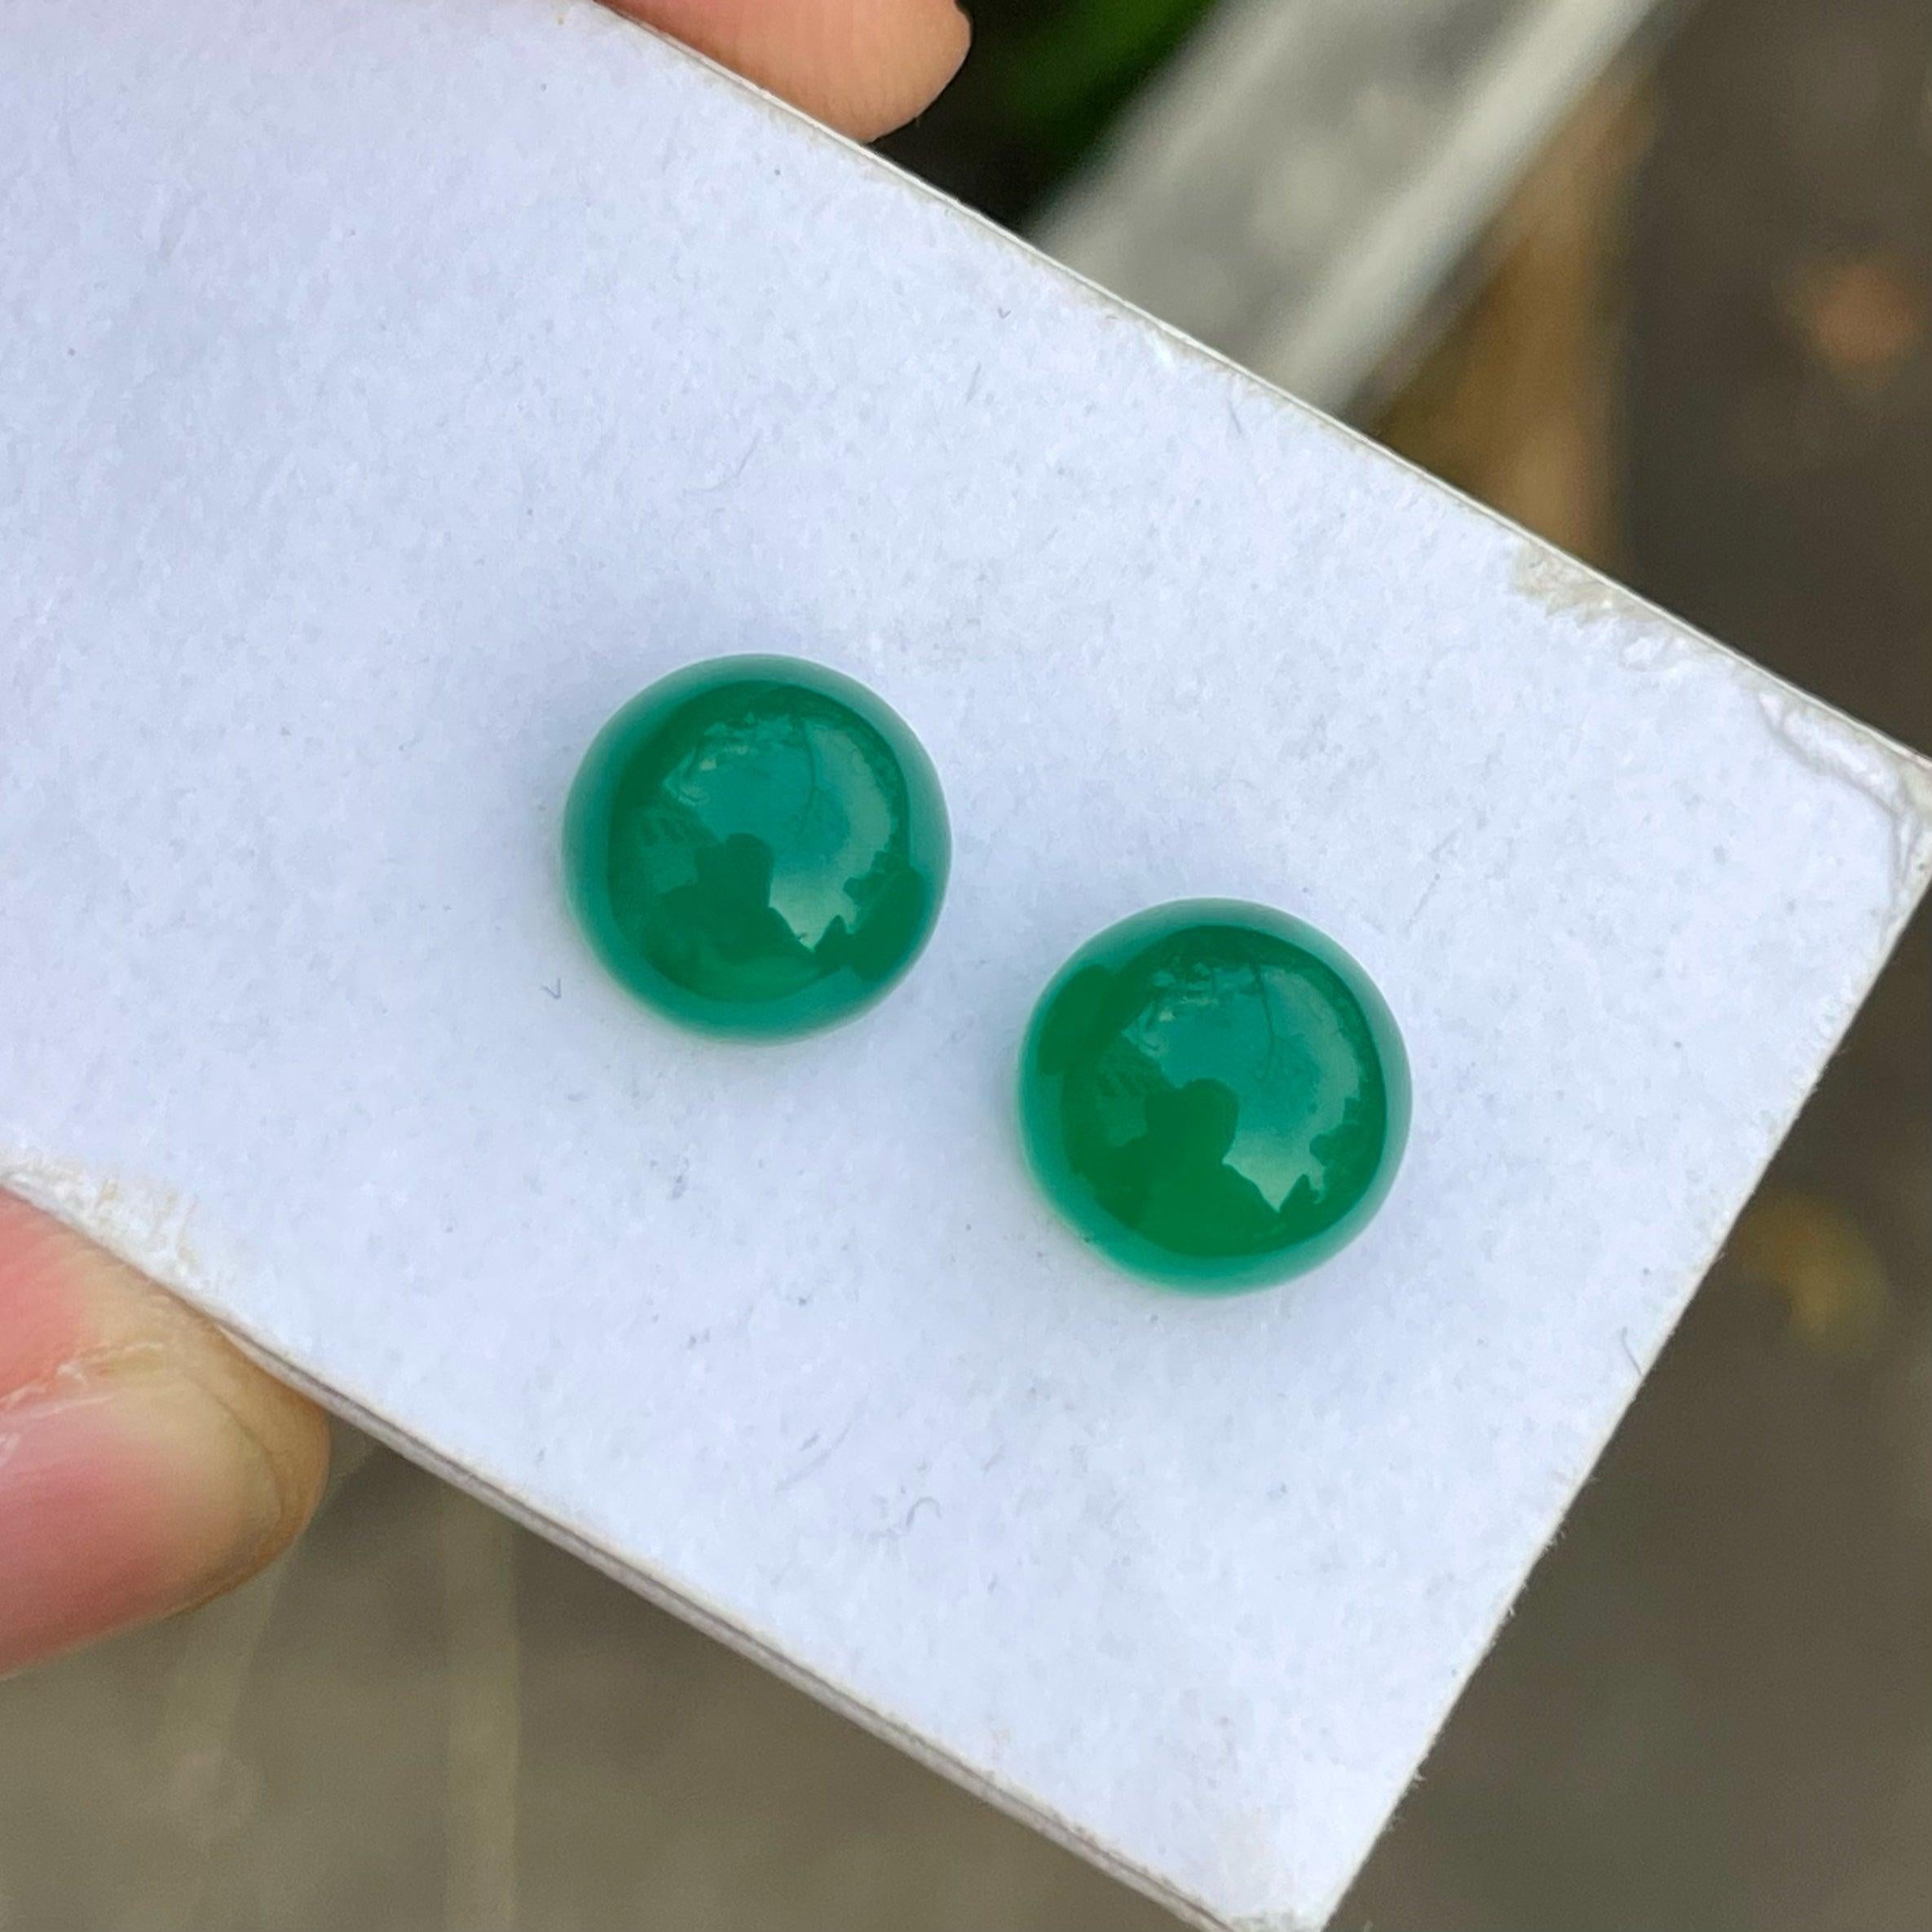 Round Cut Beautiful Green Agate Pair Gemstone 7.25 Carats Round Shape Indian Gemstone  For Sale